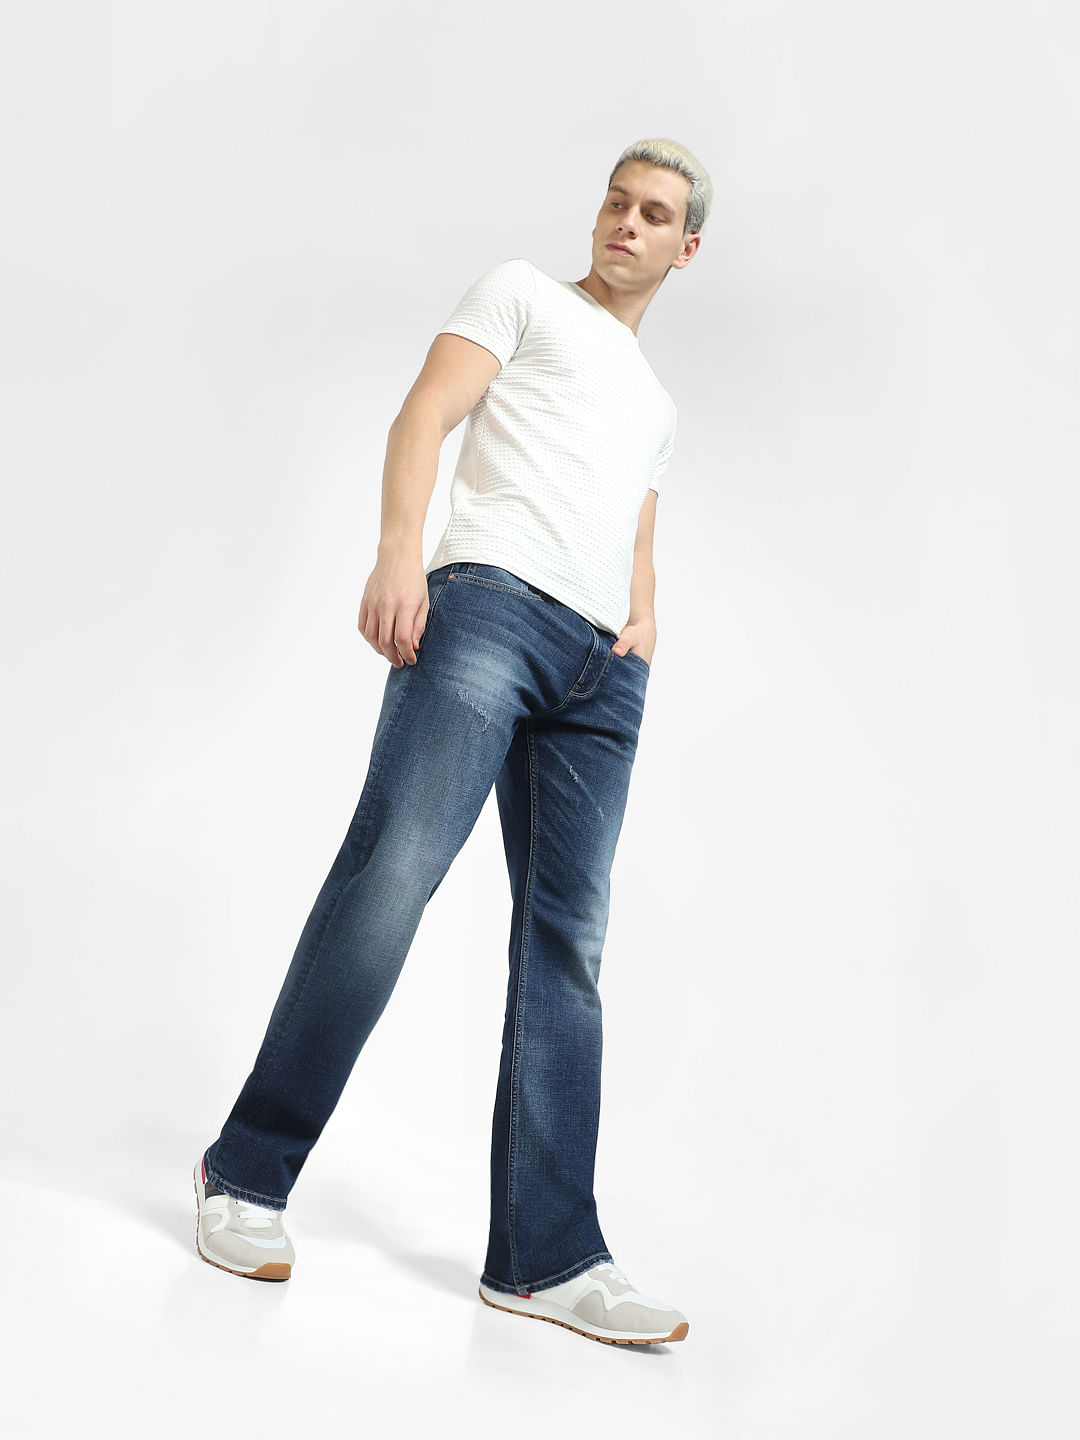 Mens Bootcut Jeans  Buy Mens Bootcut Jeans online at Best Prices in India   Flipkartcom